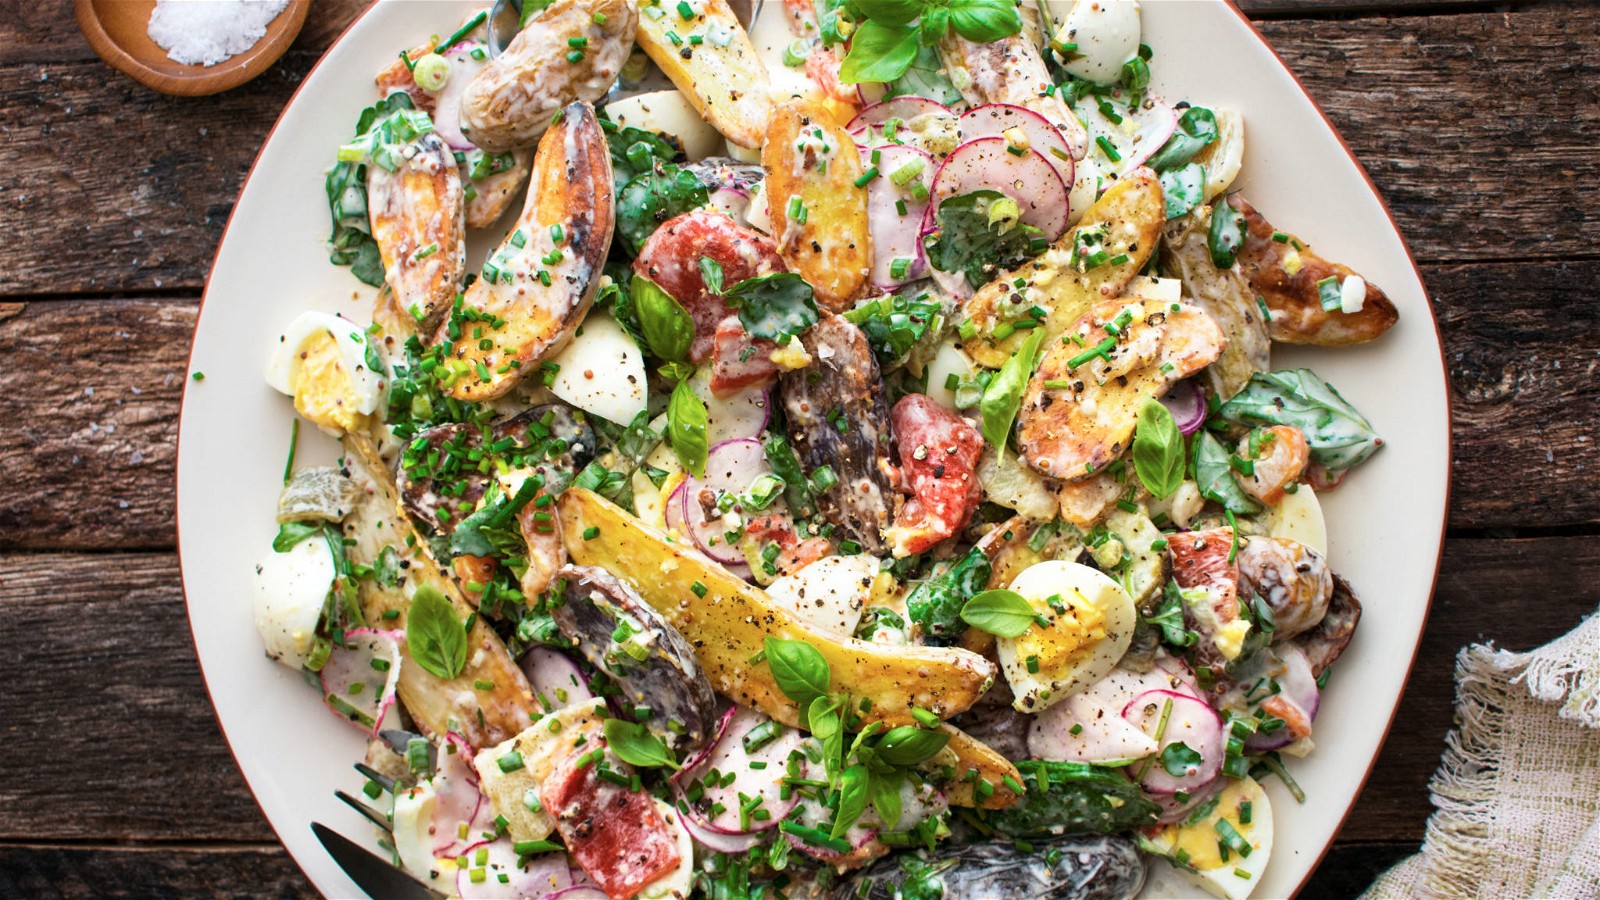 Image of Grilled Fingerling and Herb Potato Salad